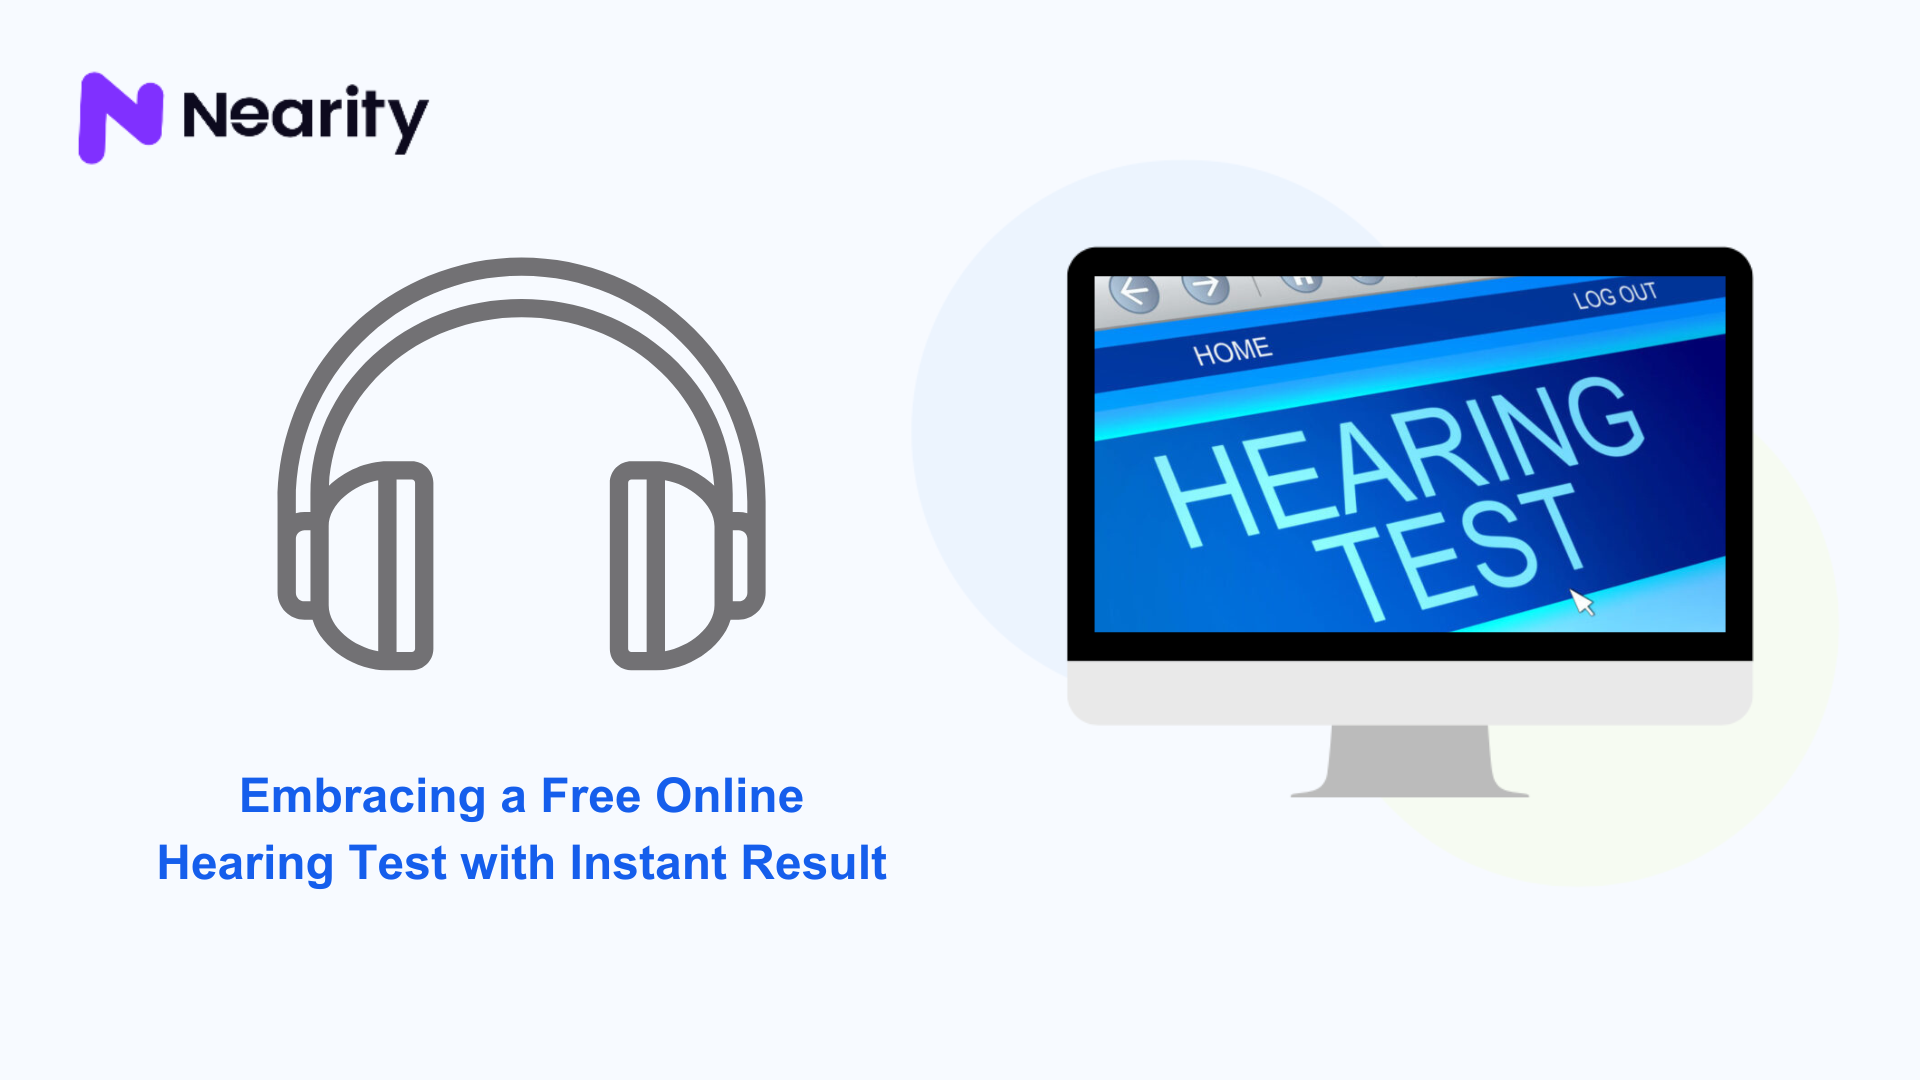 Embracing a Free Online Hearing Test with Instant Result